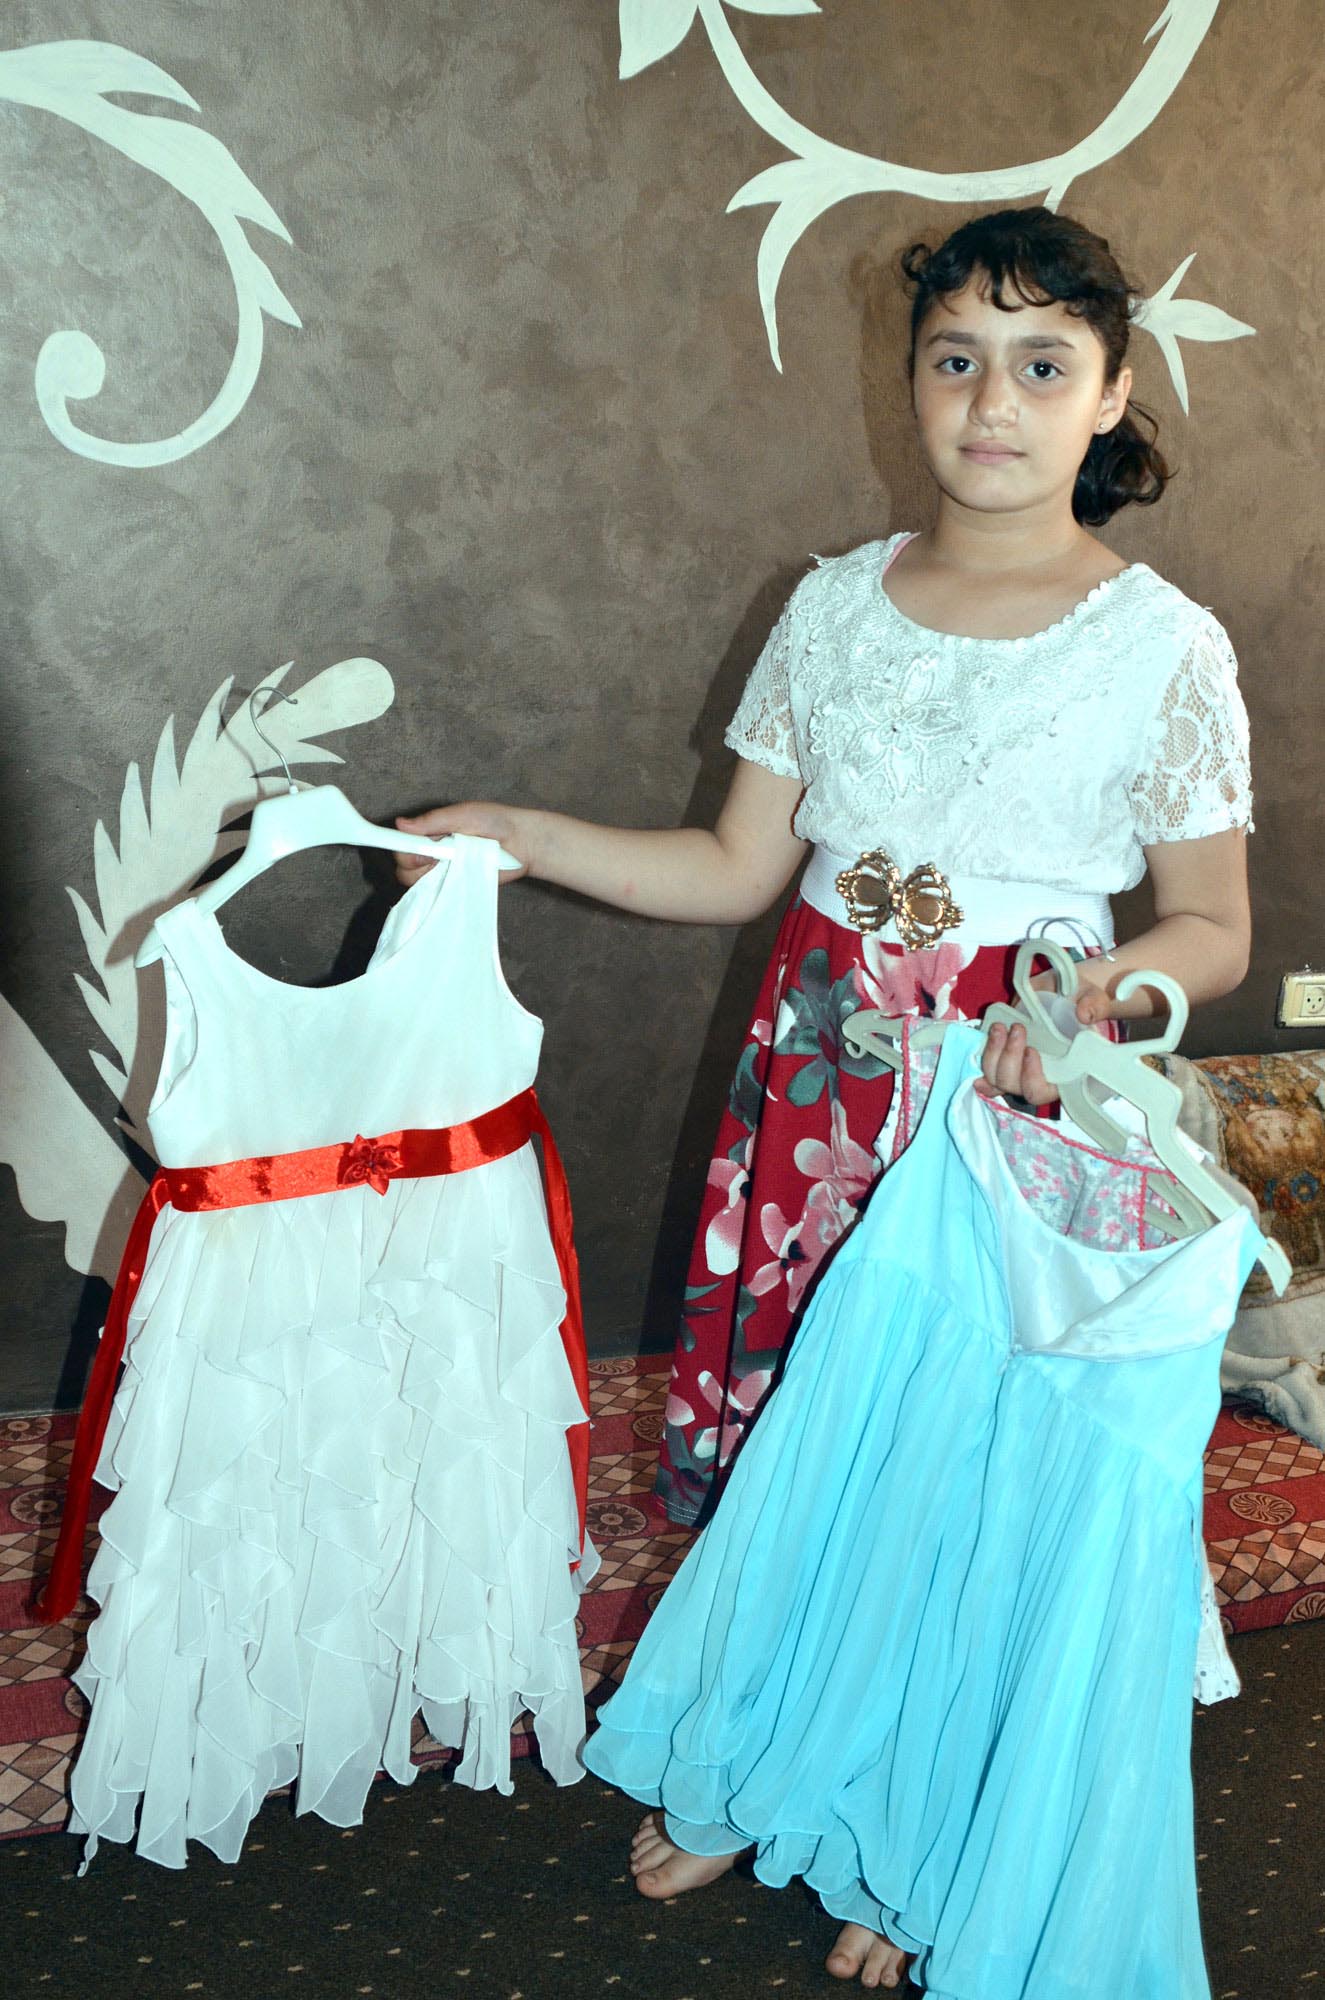 Malak holds up her dresses from Syria.